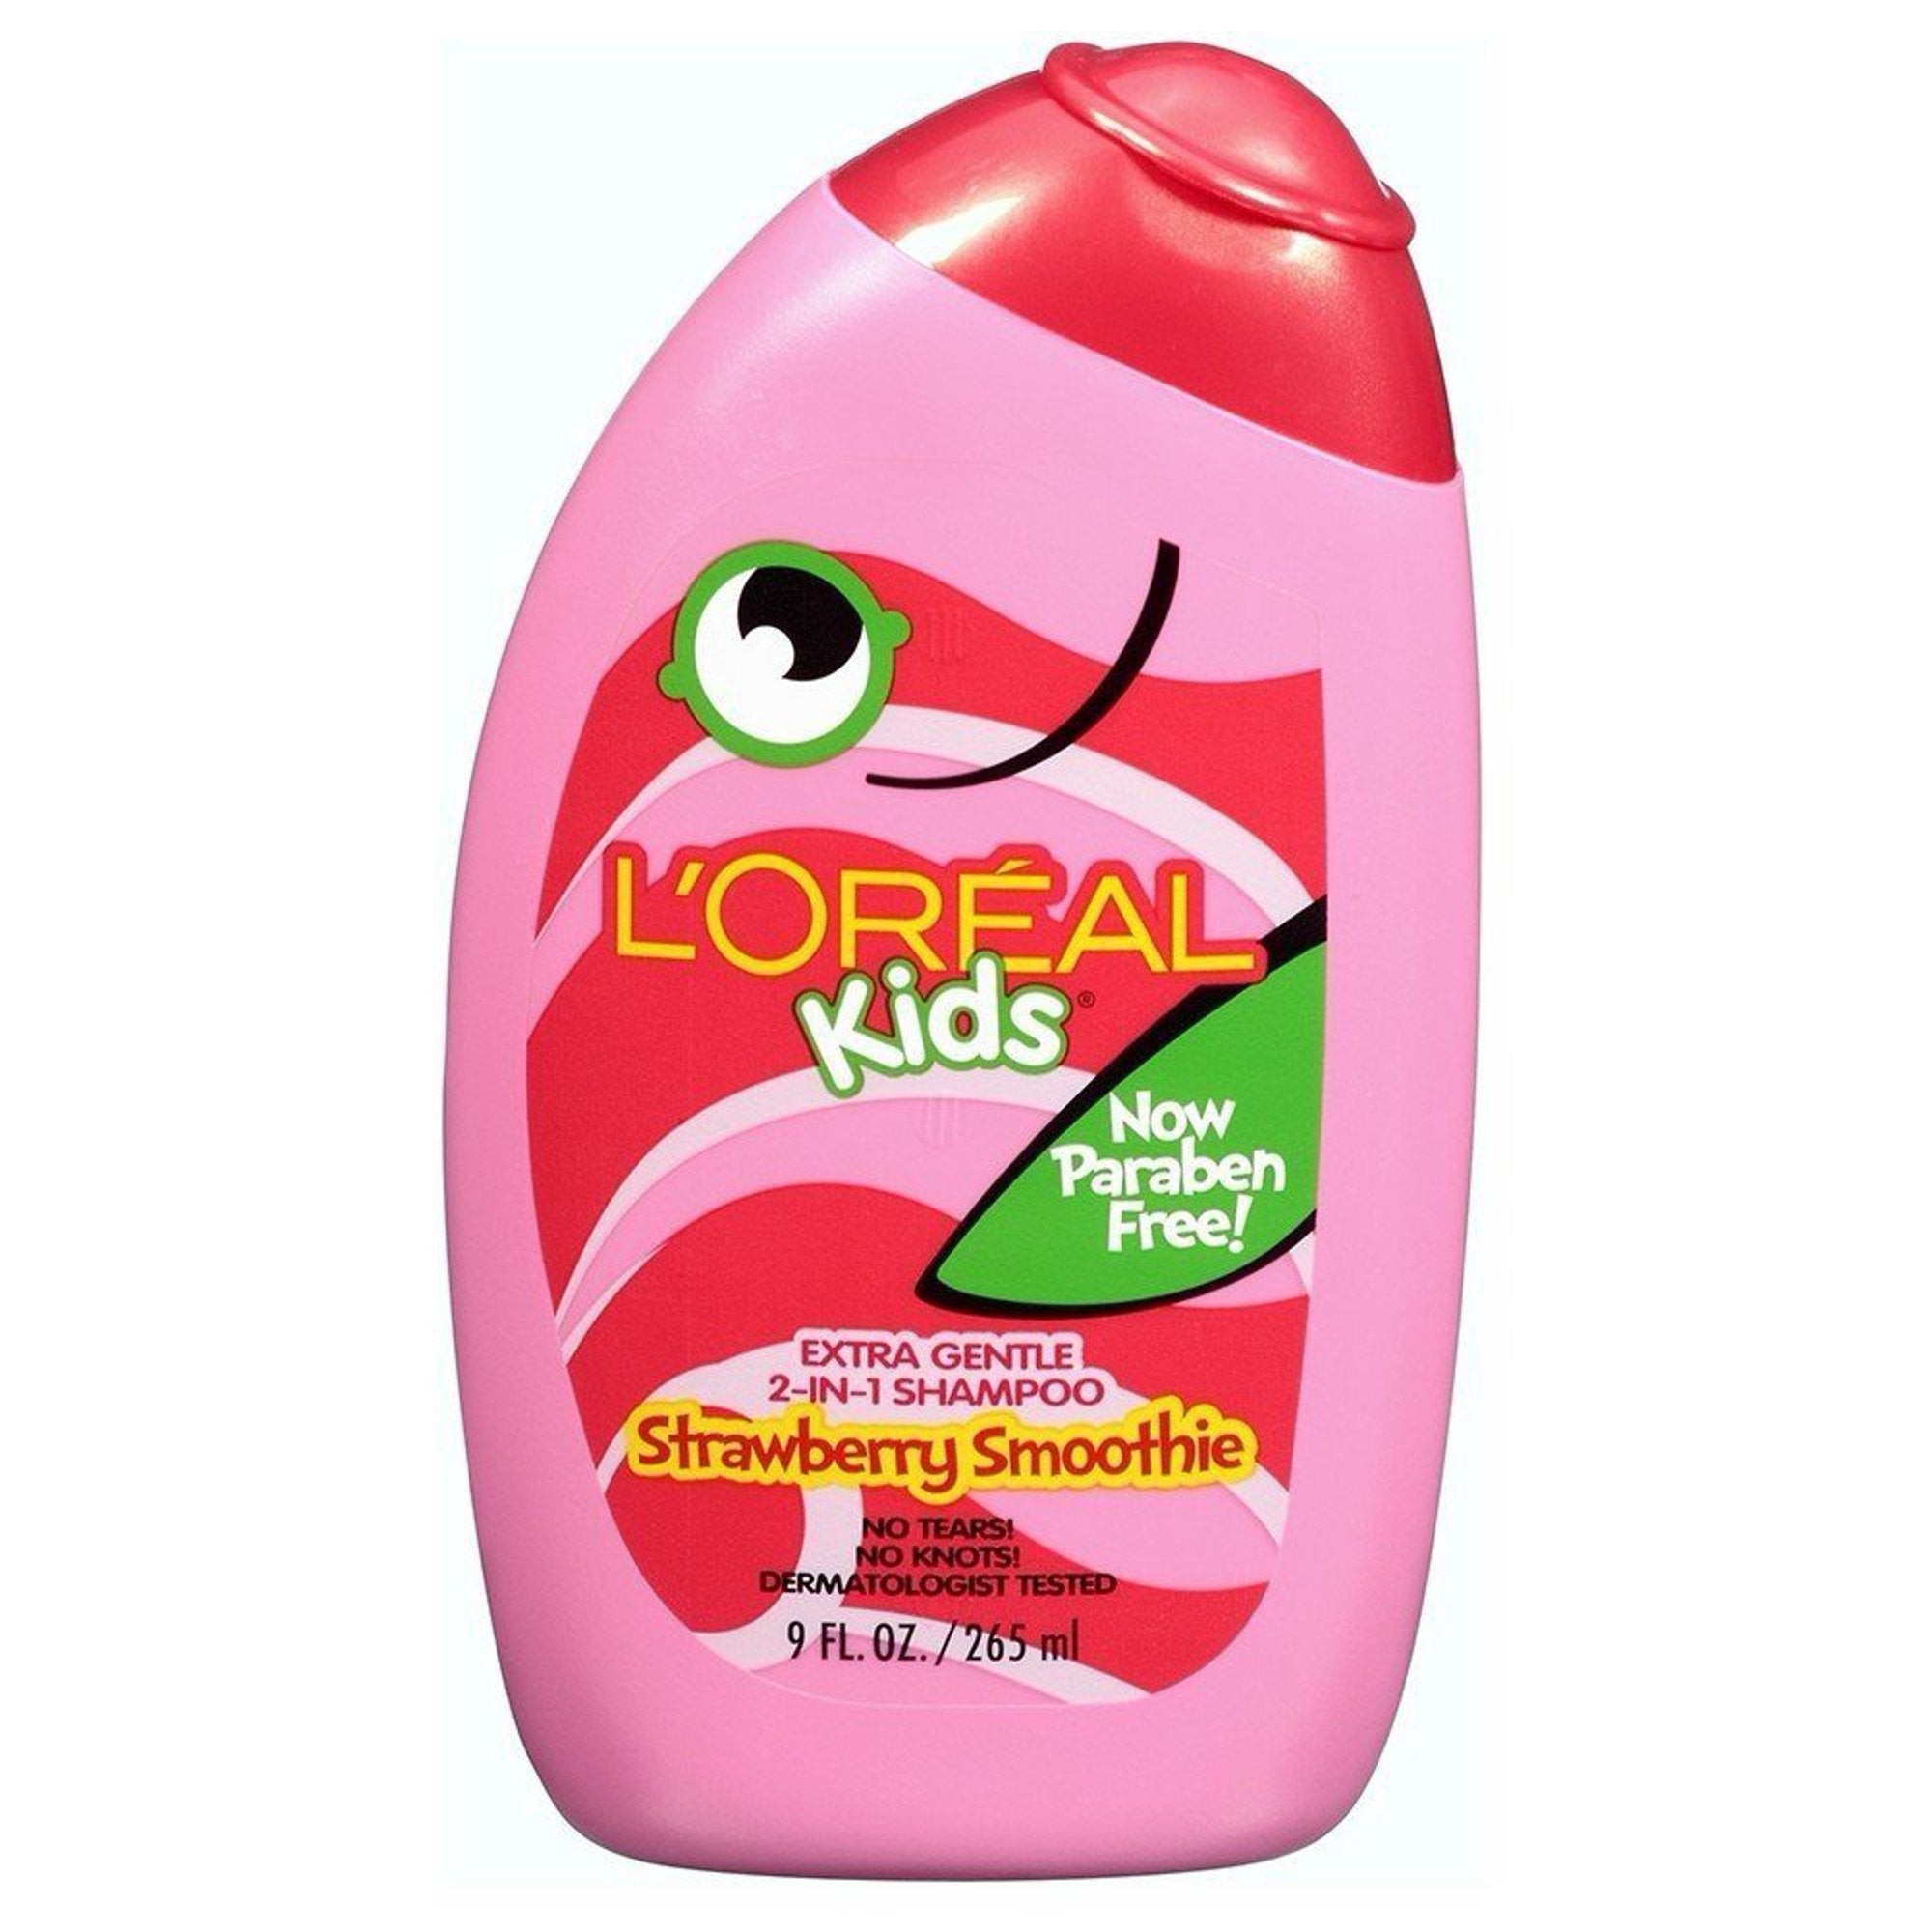 Loreal Kids 2in1 Shampoo Extra Gentle Strawberry Smoothie 265ml Blue - Baby Moo